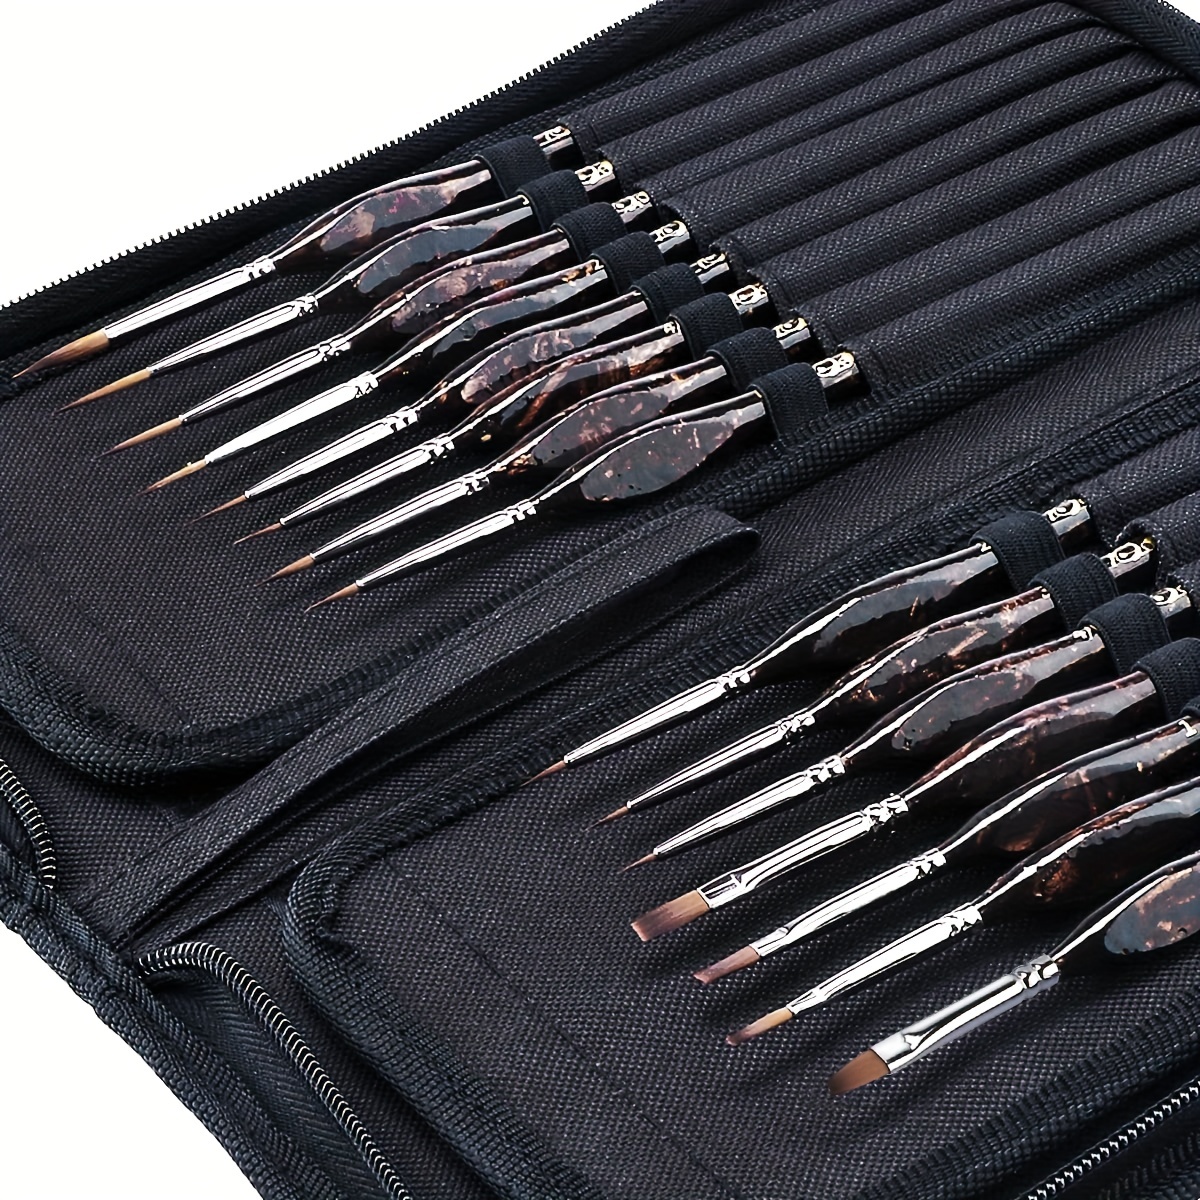 

15pcs Artist Detail Paint Brushes: Perfect For Model Miniature Painting - Comes With A Convenient Case!